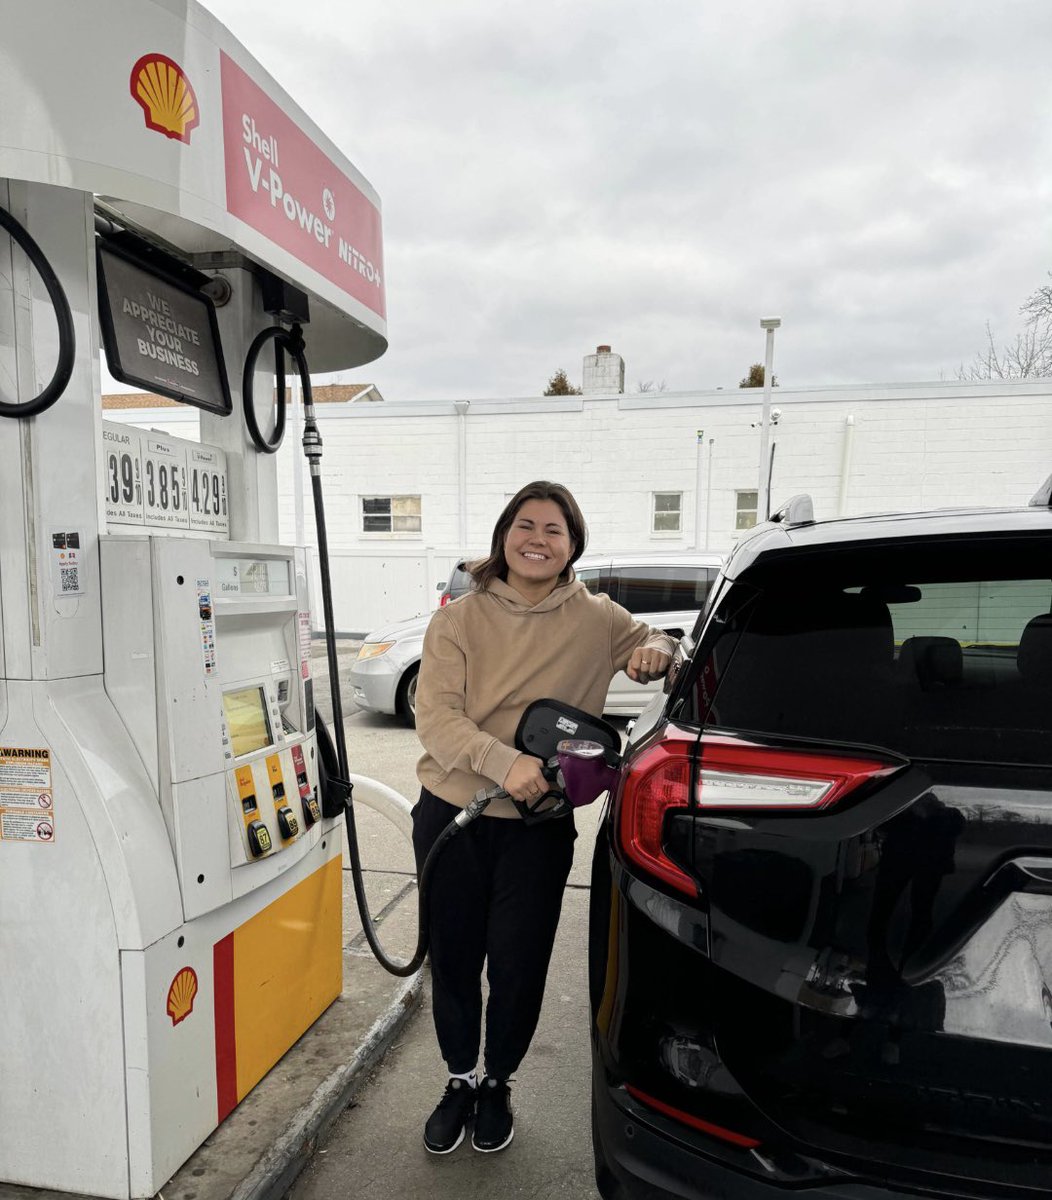 Hey hockey fans! I've teamed up with Shell to pump up your savings with Fuel Rewards fuelrewards.com/islanders ! Score 25c* off on V Power fill-ups during home games, in real-time, when you join The Shell Fuel Rewards Program!🚗⛽🔥 *Terms and Conditions apply*